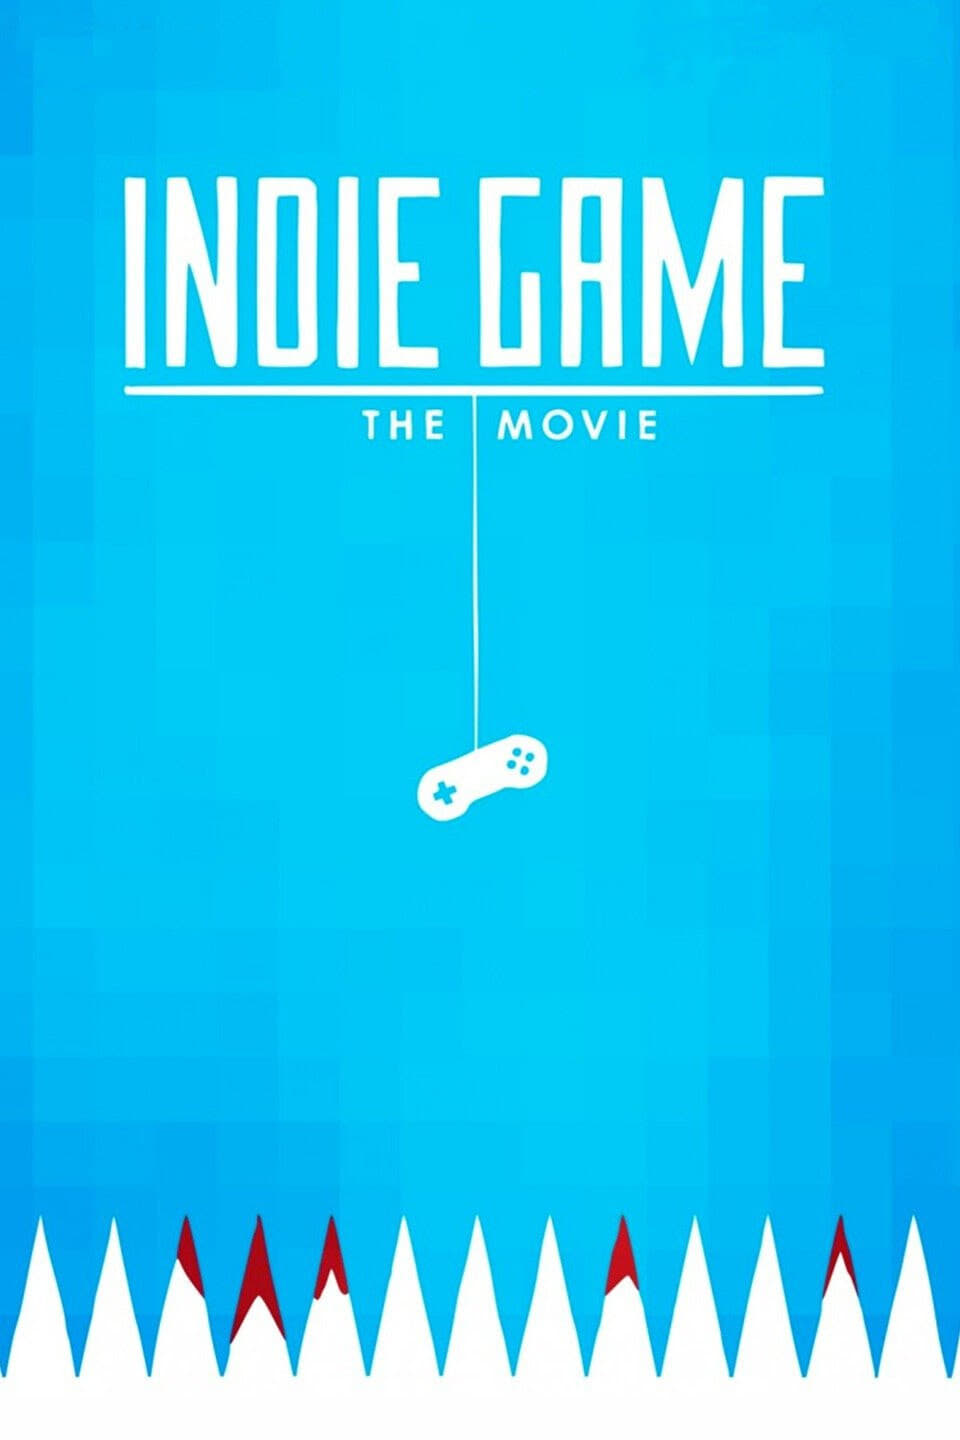 Video Games: The Movie